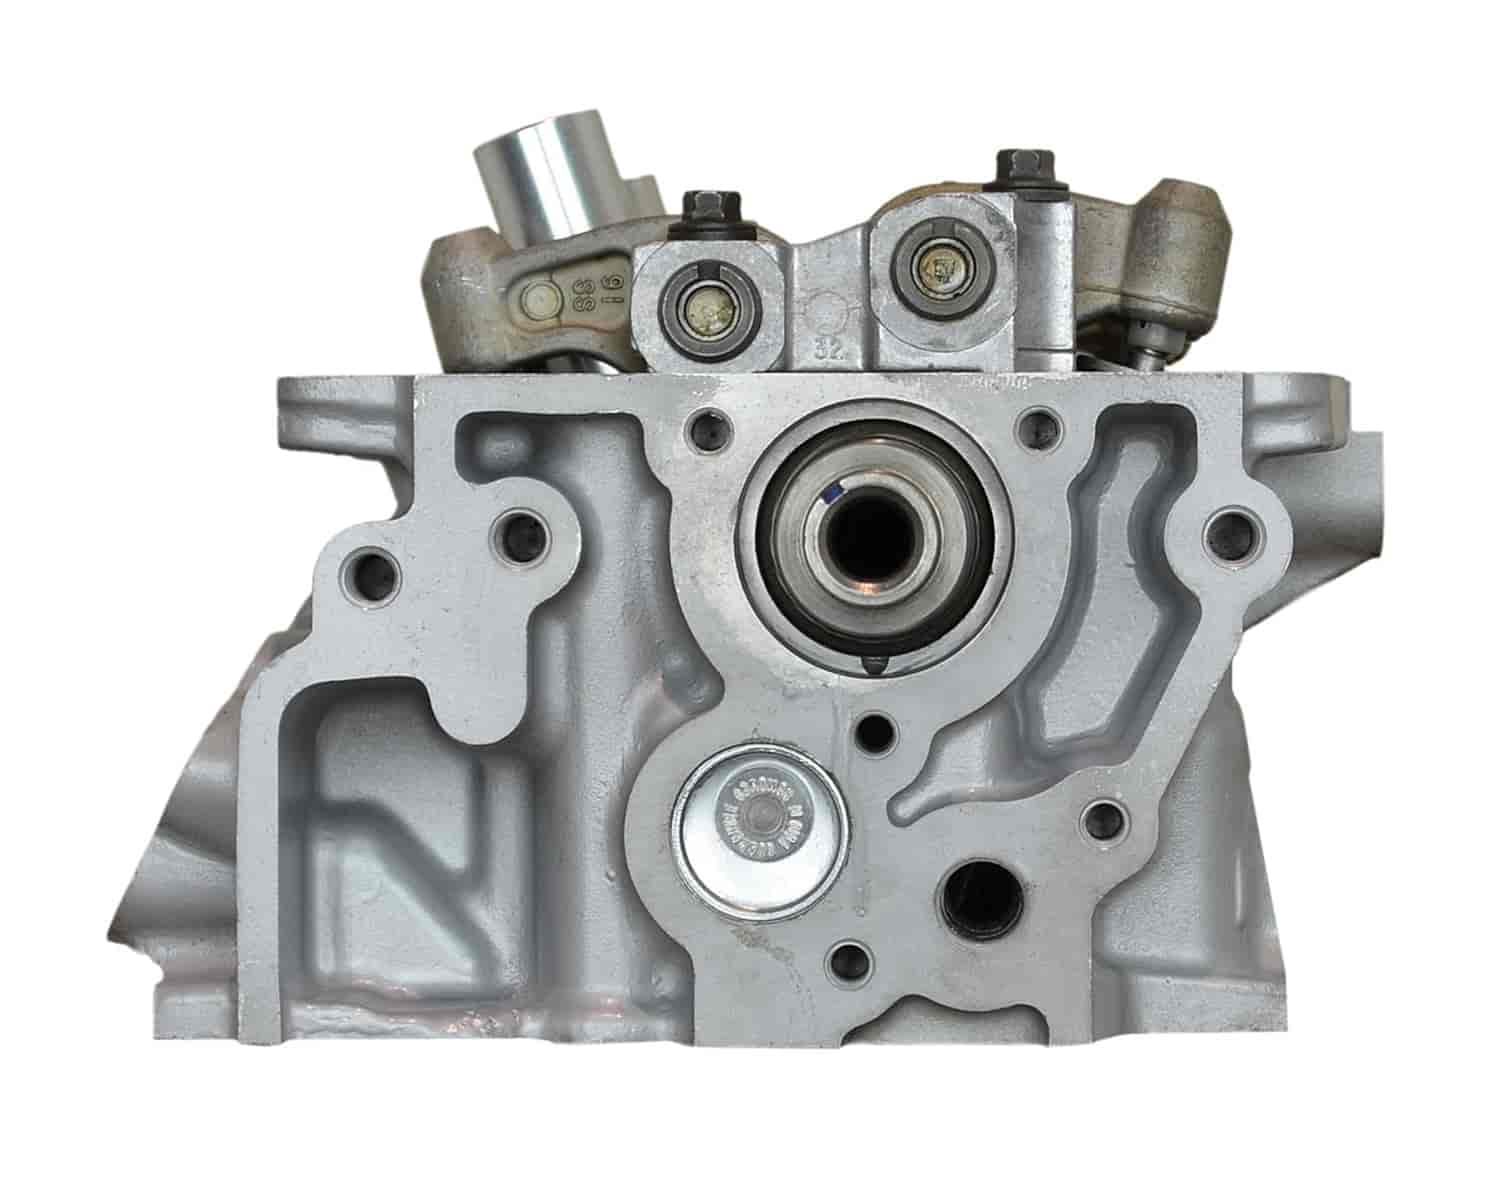 Remanufactured Cylinder Head for 2004-2010 Chrysler/Dodge with